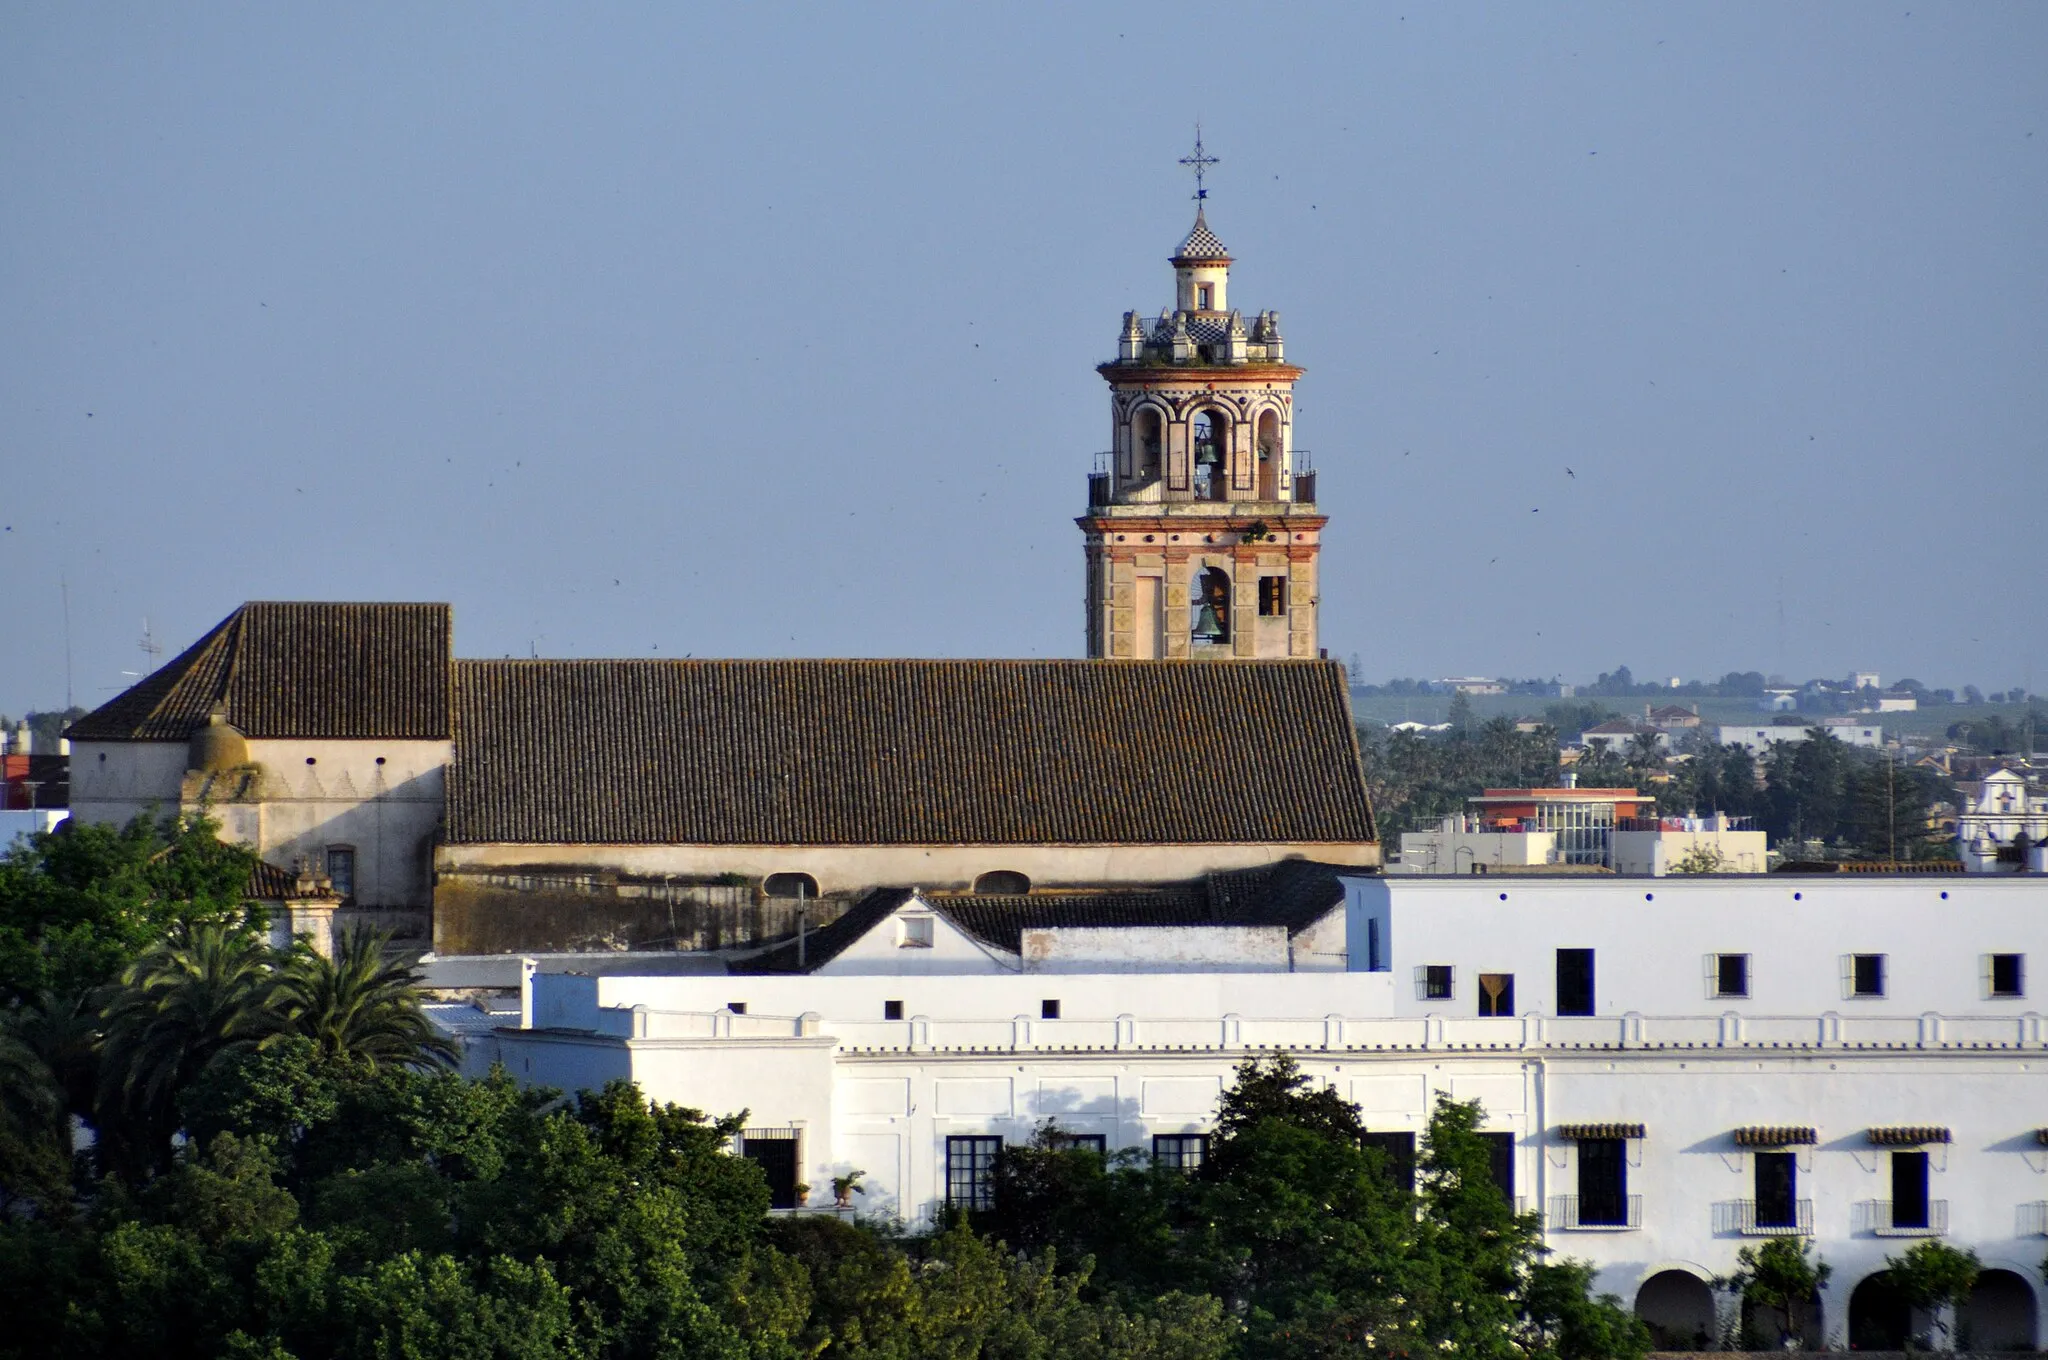 Photo showing: View of the Church of Our Lady of the O and the palace of the Dukes of Medina Sidonia. Sanlúcar de Barrameda, Cádiz, Spain. Picture taken from the top floor of the Guadalquivir Hotel.